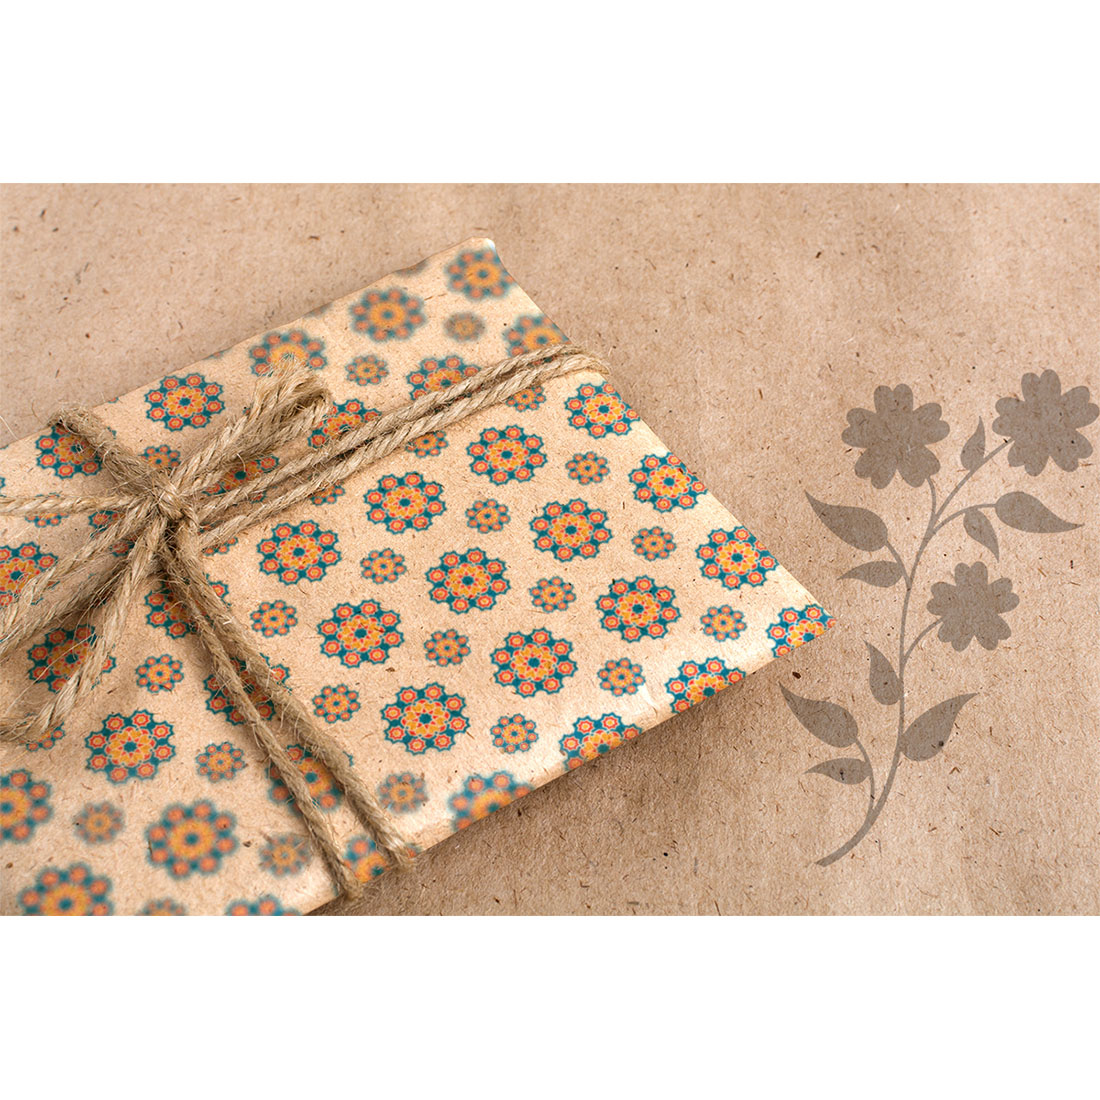 Image with wrapping paper with amazing geometric patterns